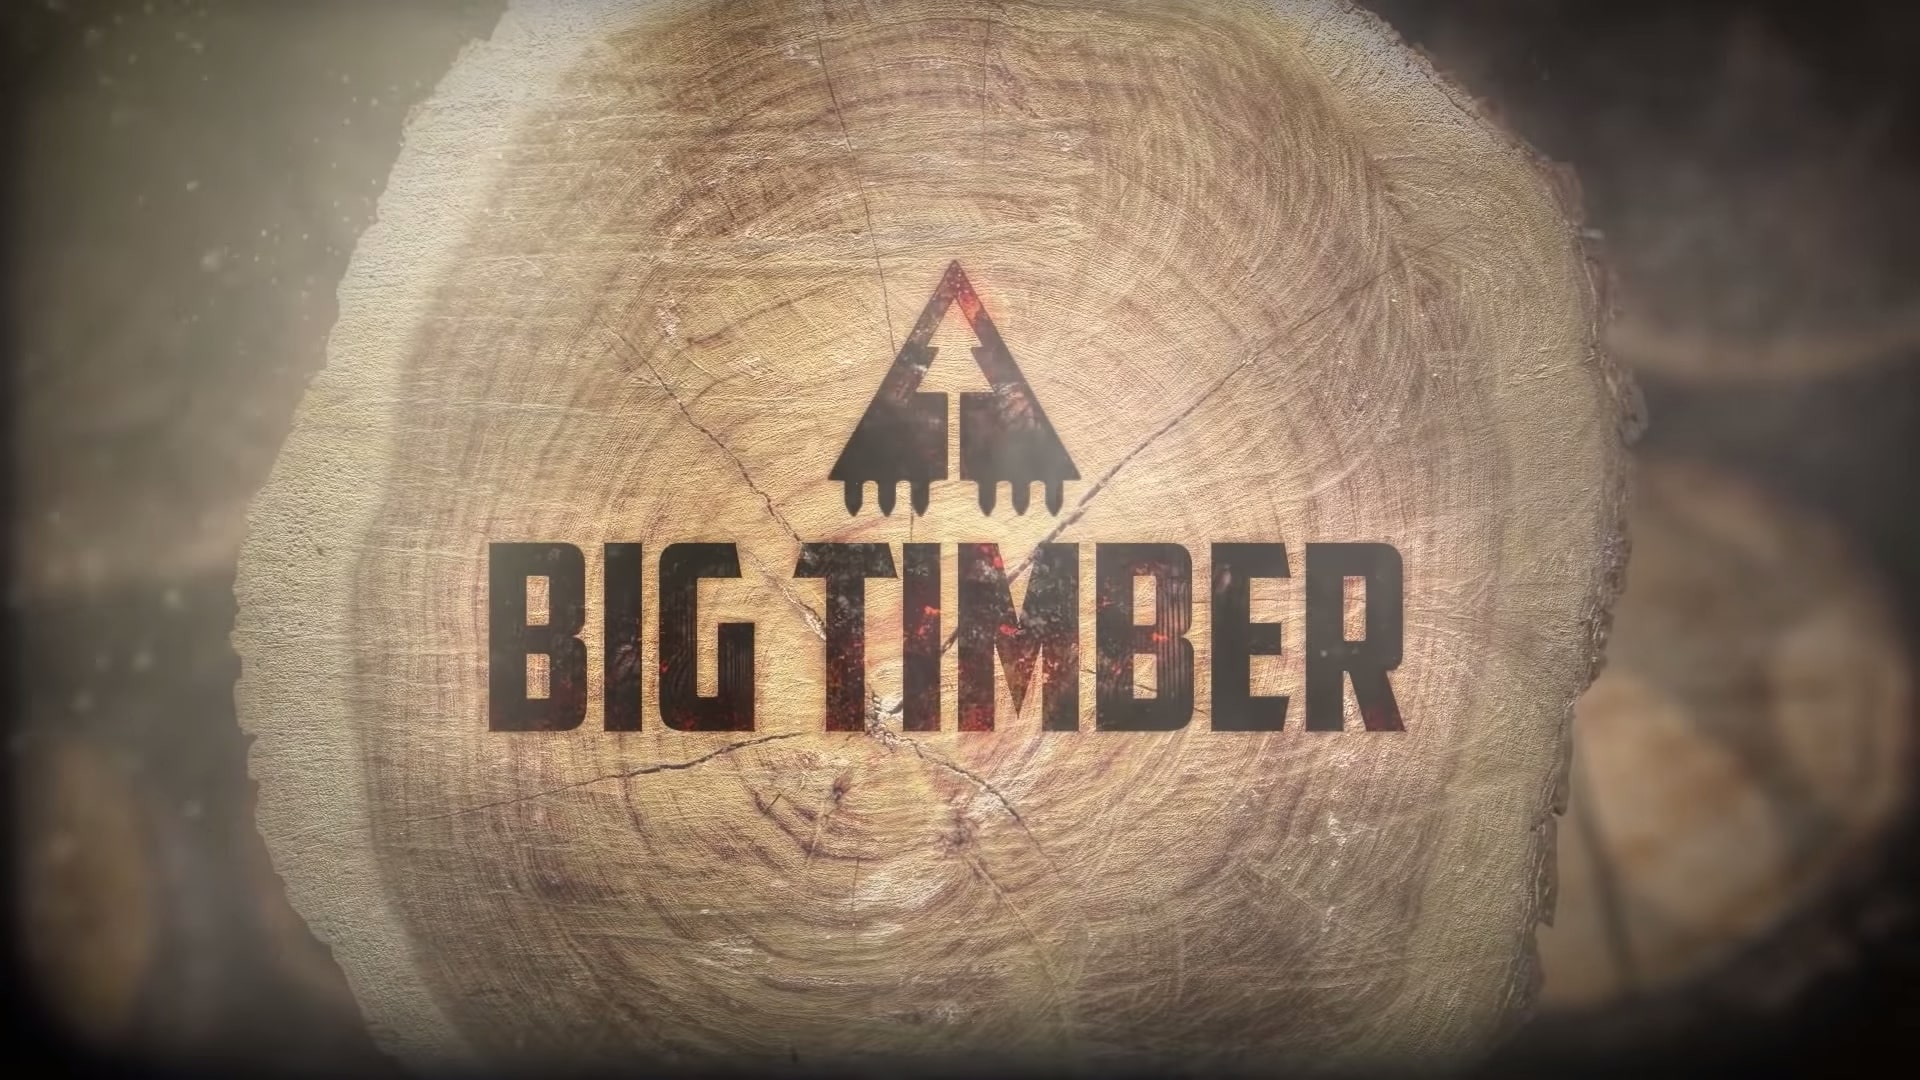 Netflix Big Timber Trailer, Coming to Netflix in July 2021